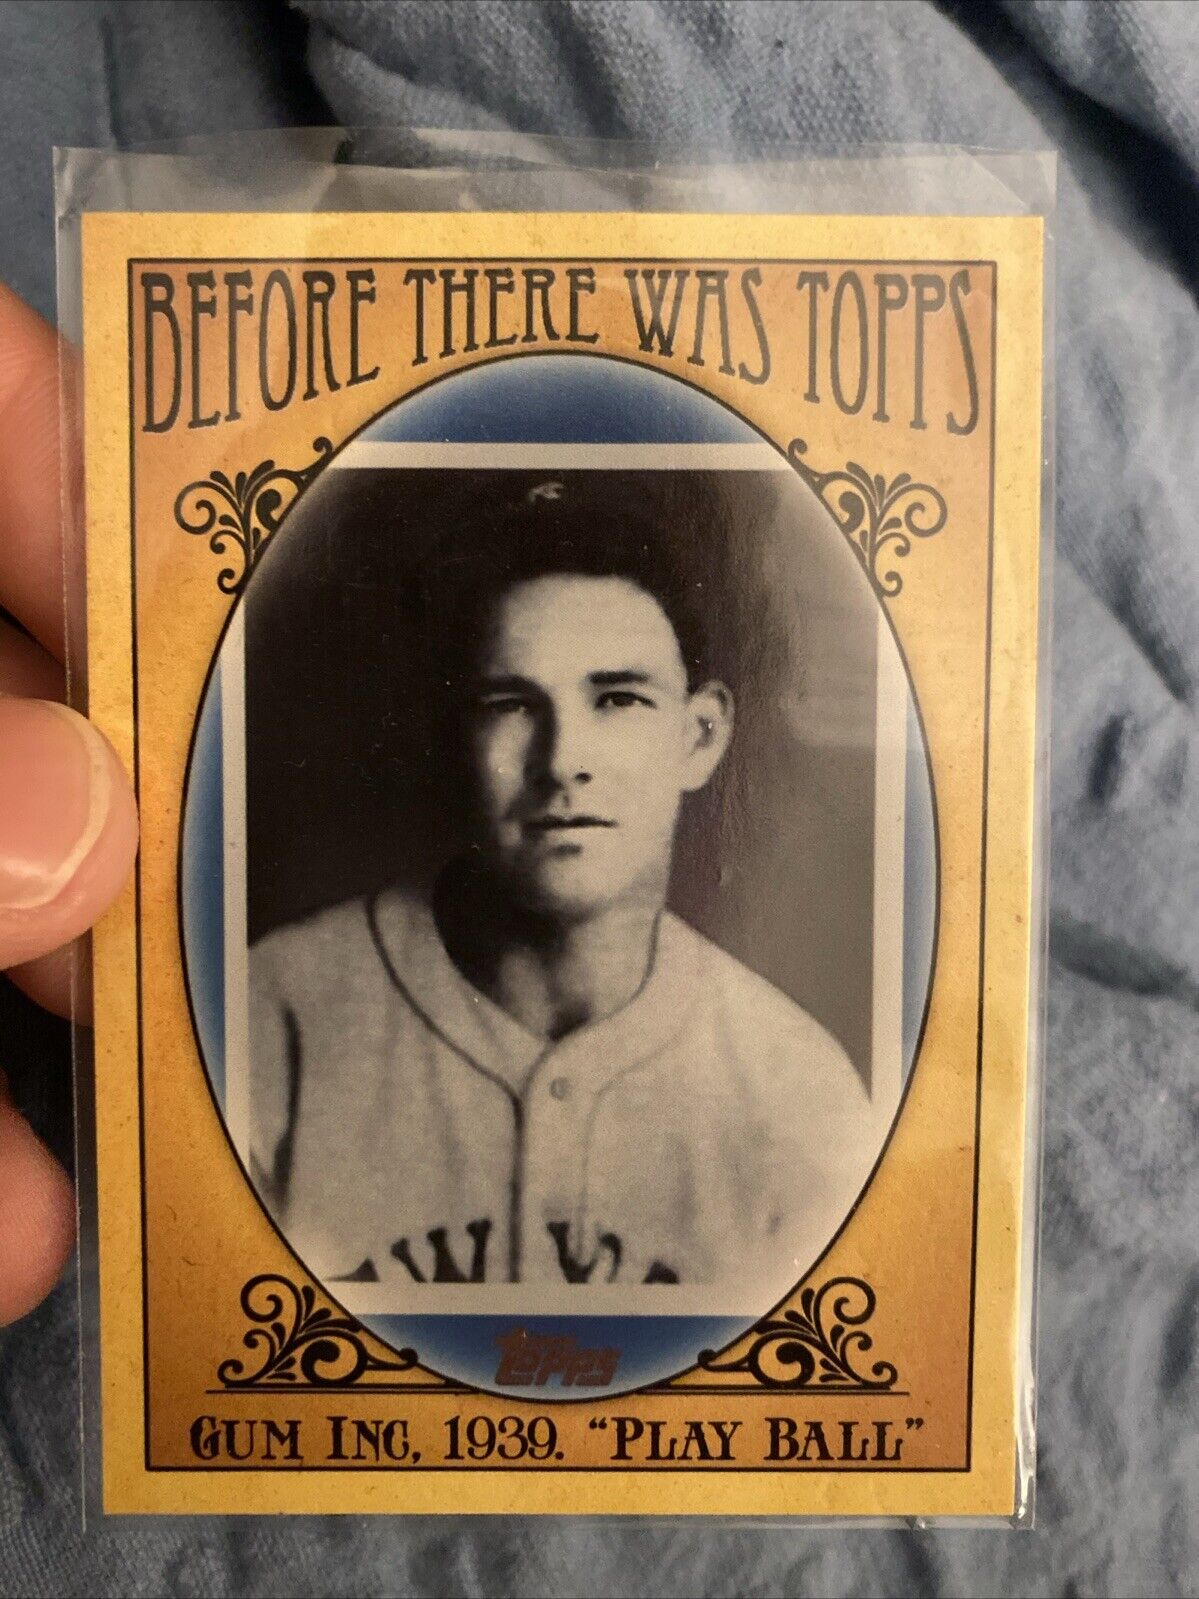 Gum Inc 1939 Play Ball  2011 Topps Before There Was Topps  #BTT6